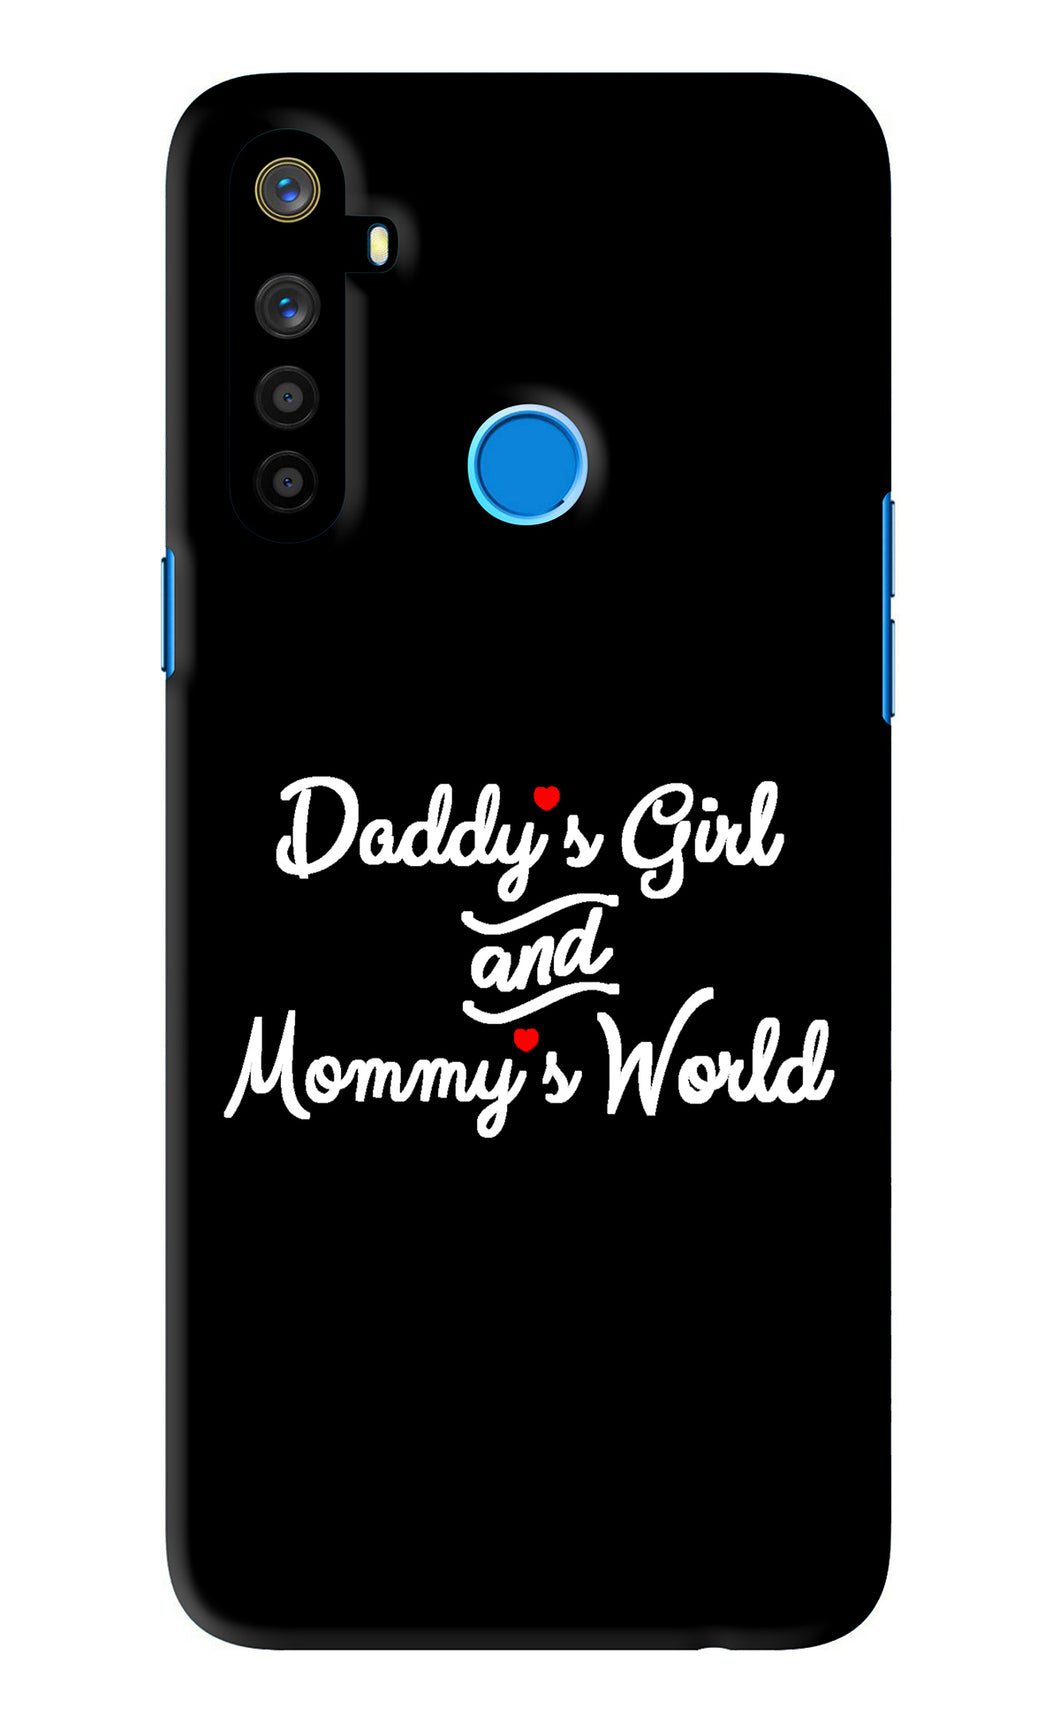 Daddy's Girl and Mommy's World Realme 5s Back Skin Wrap